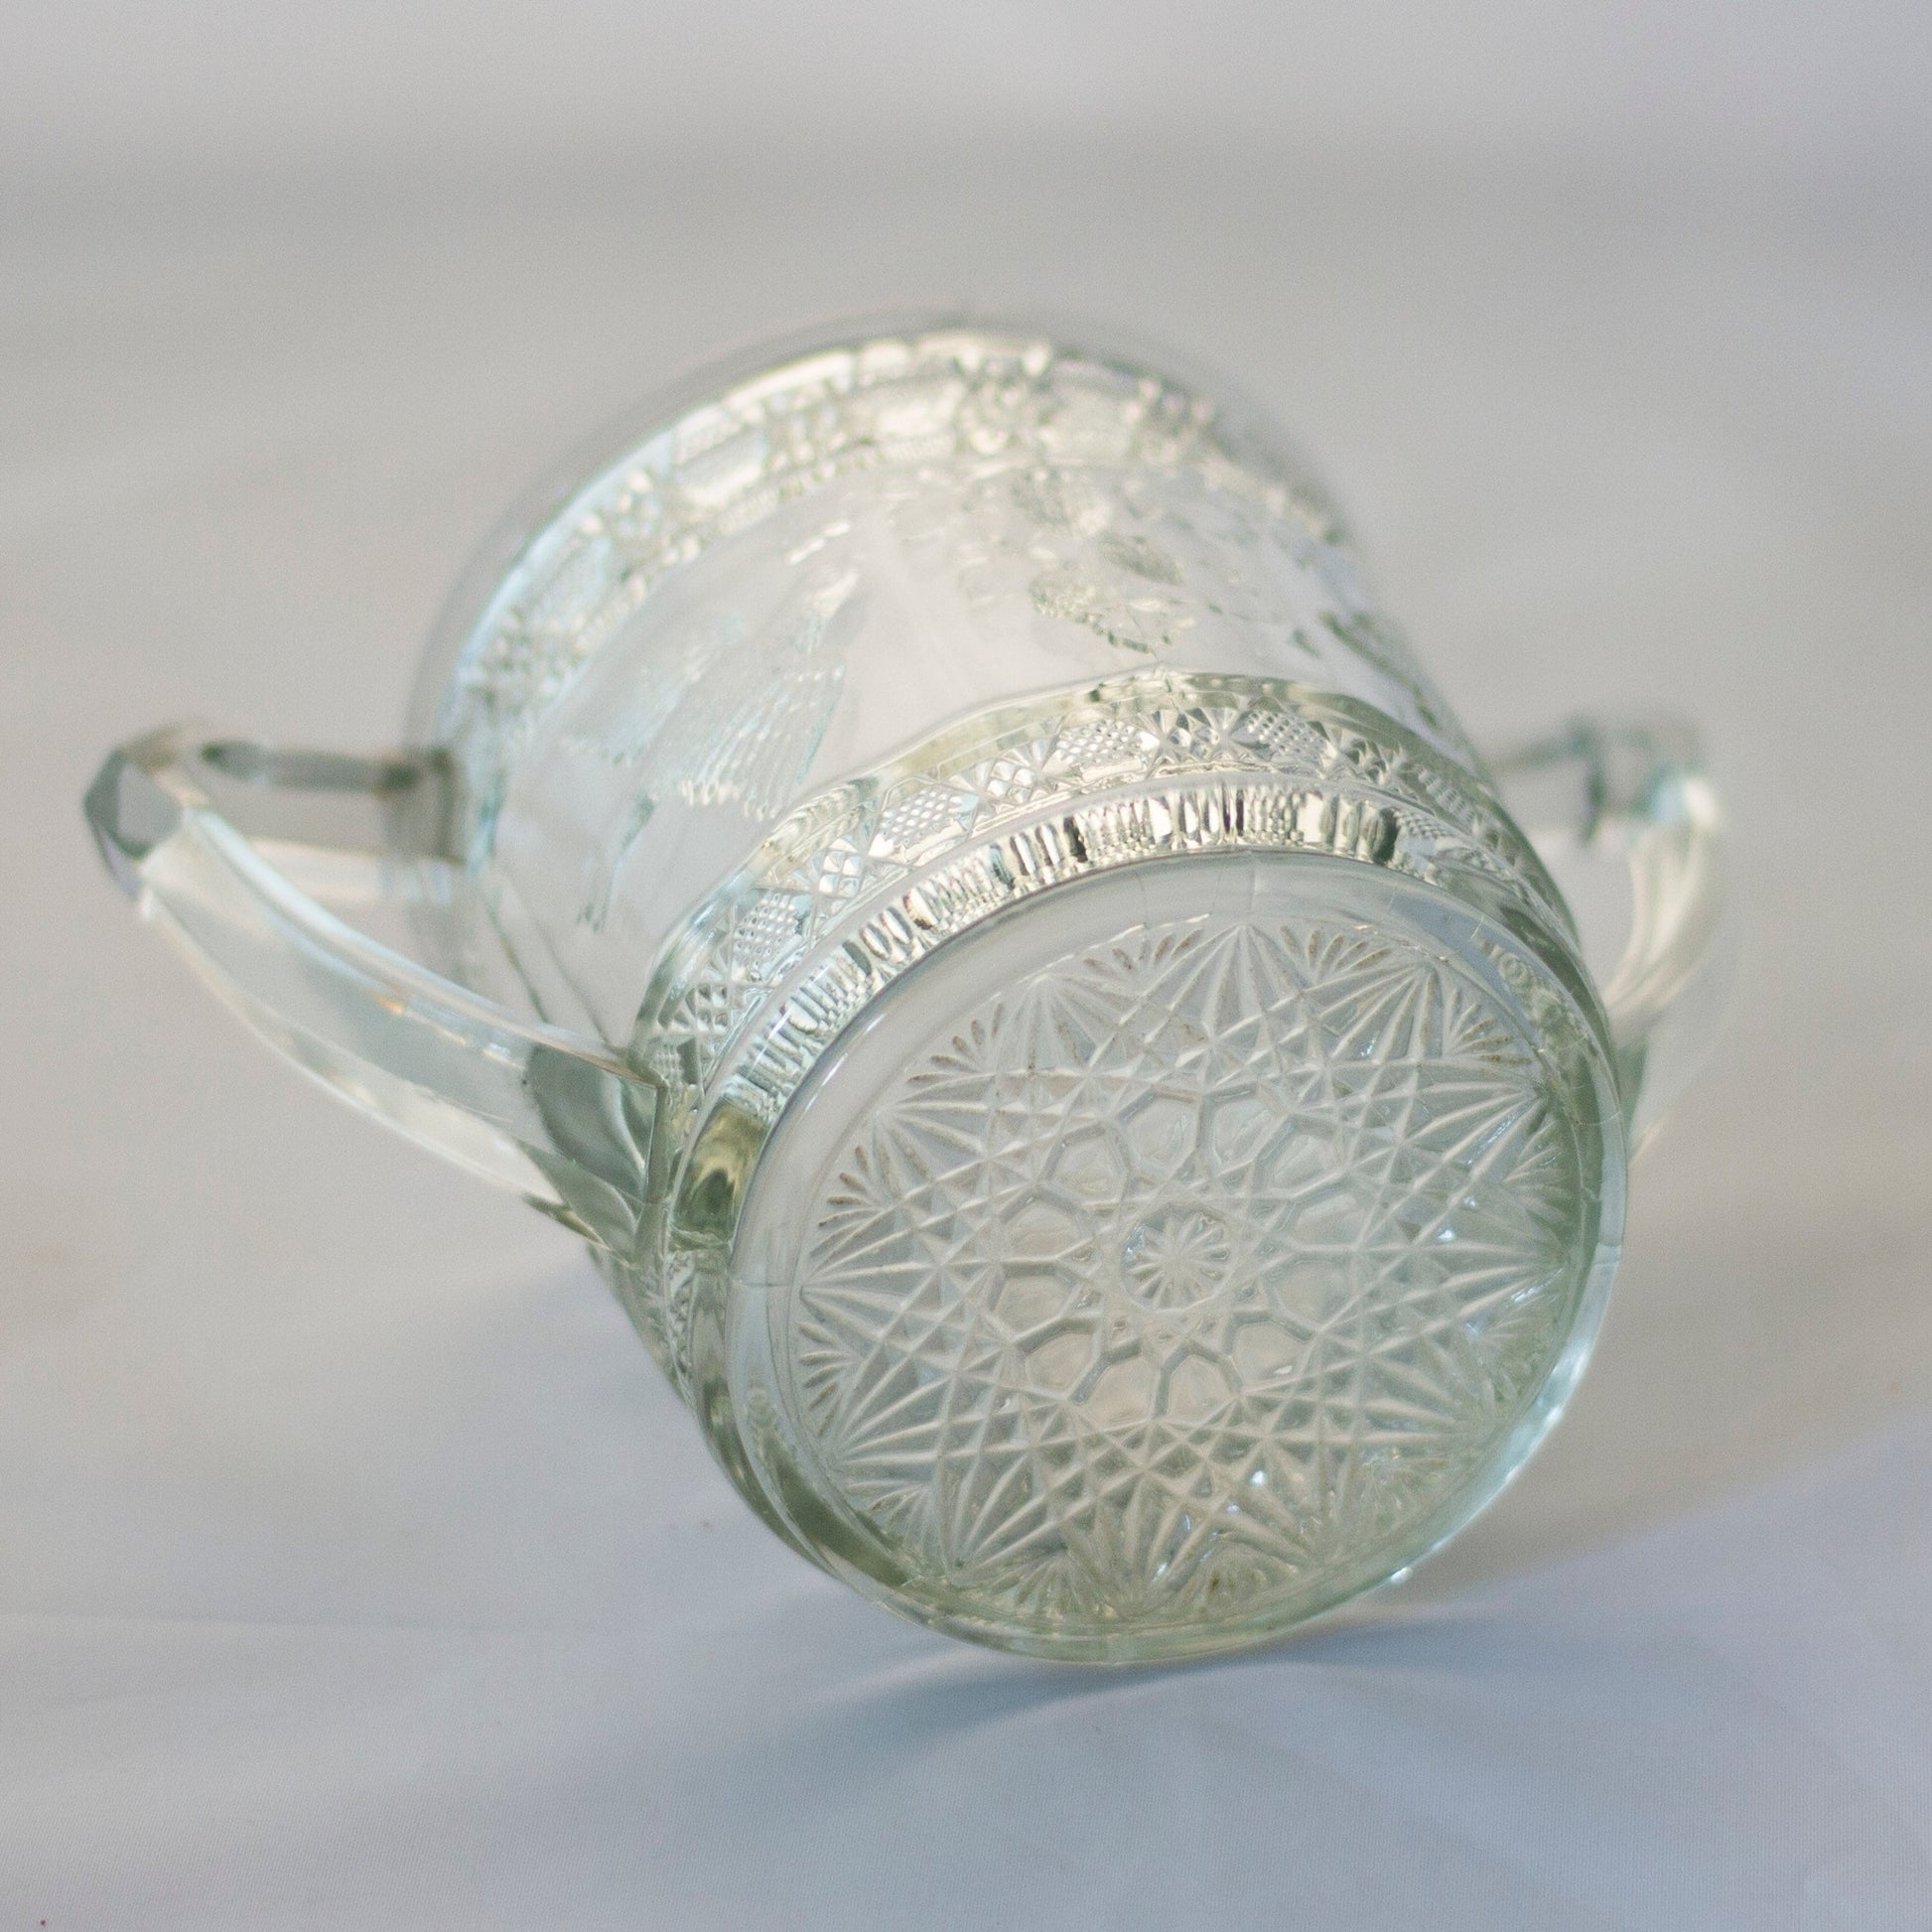 EARLY AMERICAN PATTERN GLASS Bird & Strawberries Open Sugar Bowl by Indiana Glass Circa 1910